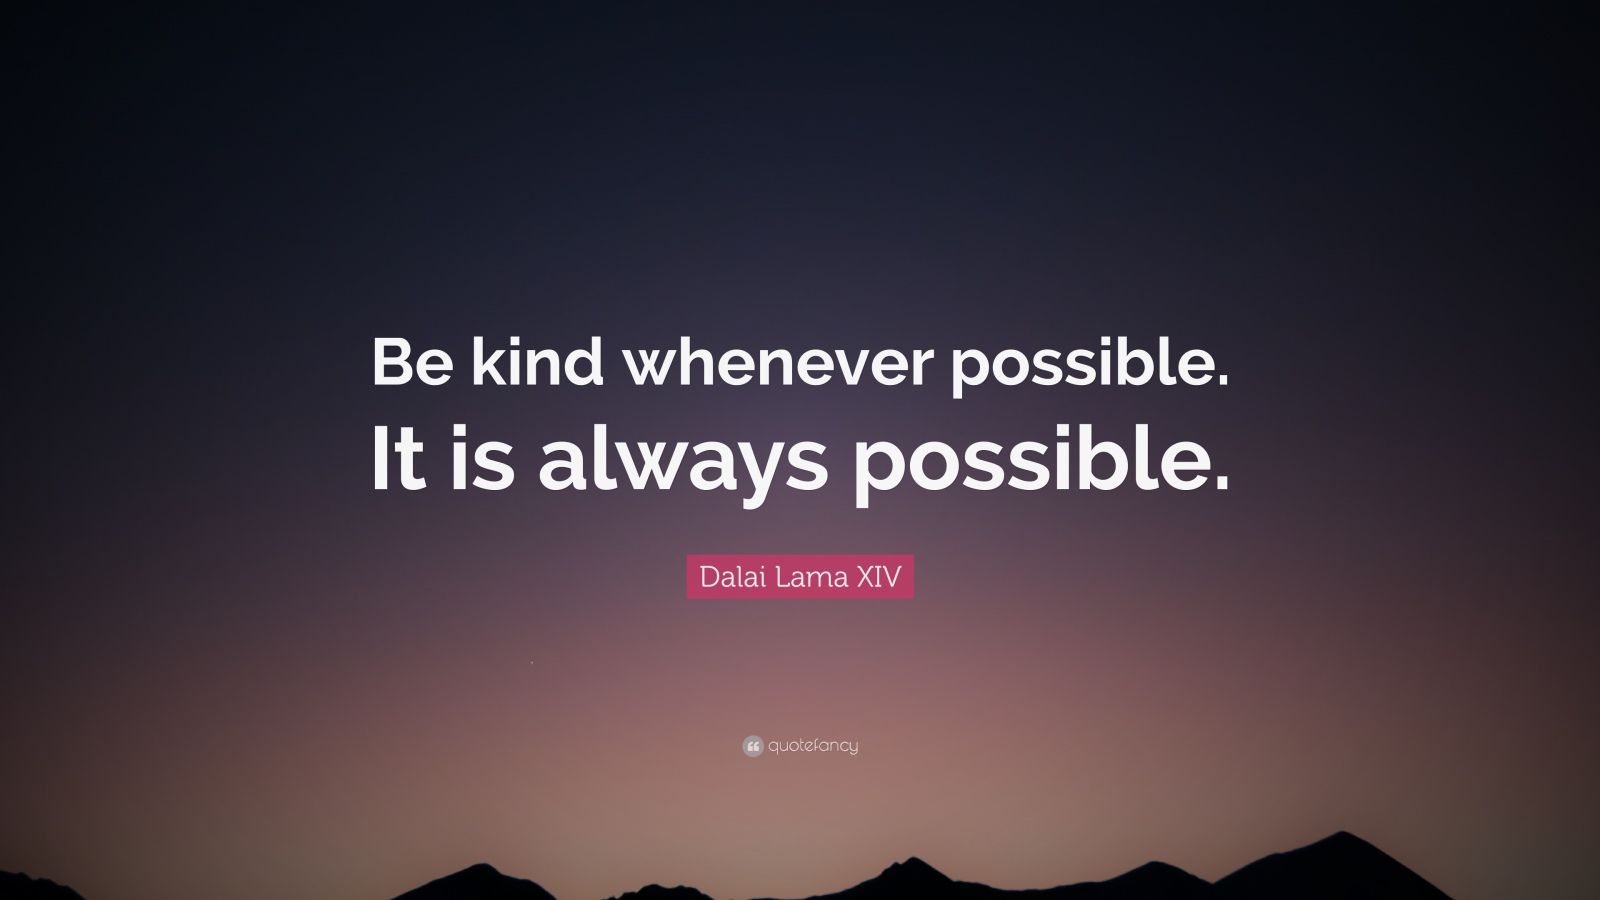 dalai lama be kind whenever possible quote